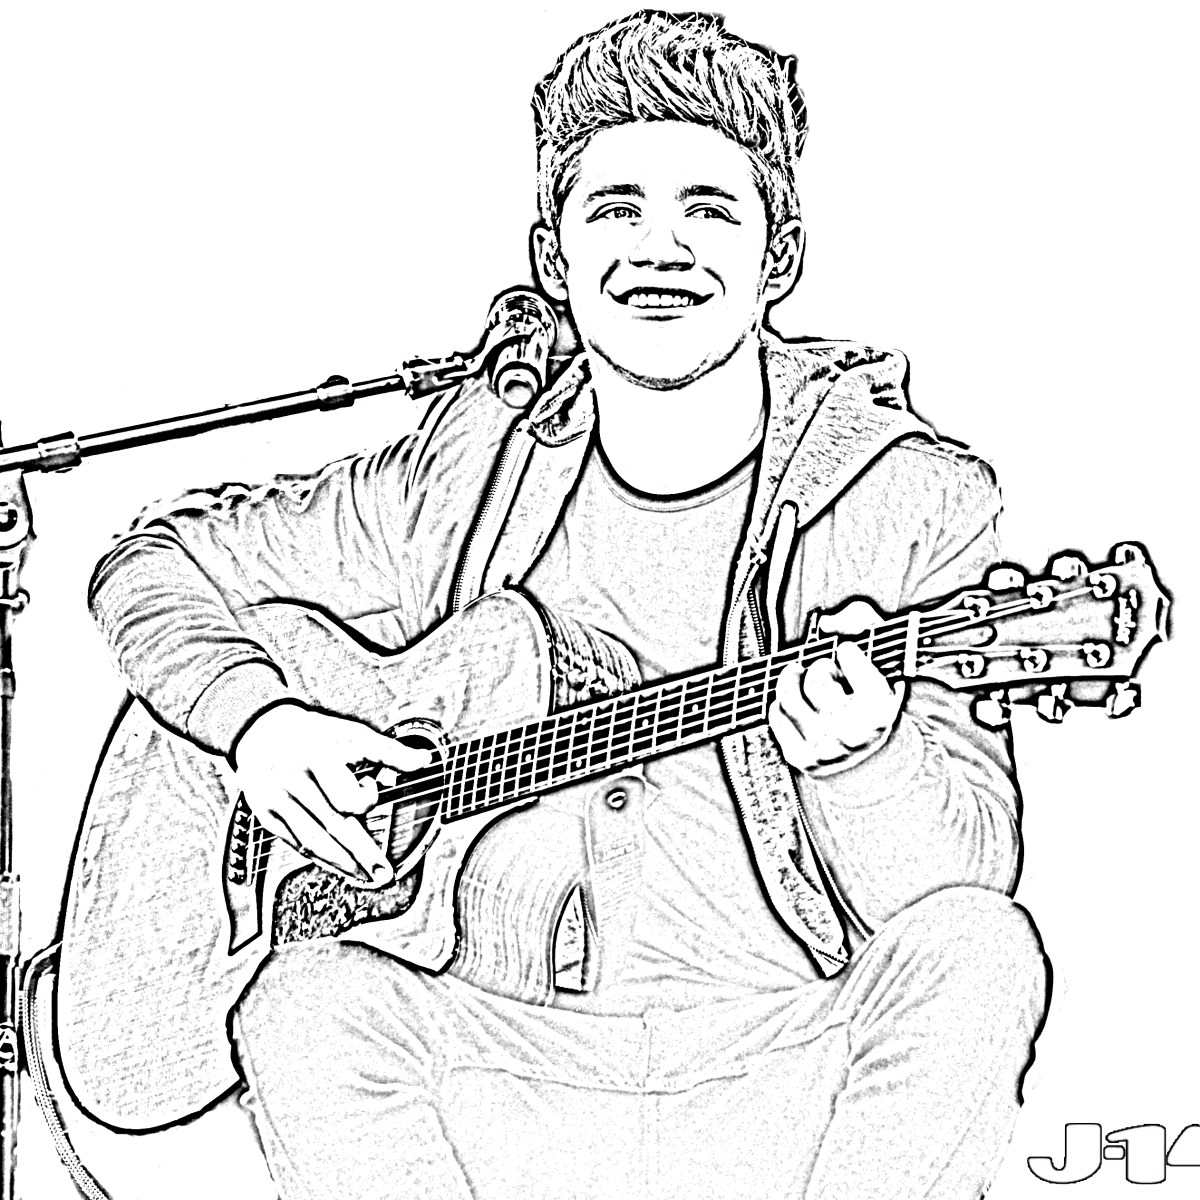 Featured image of post Quote One Direction Coloring Pages Louis tomilson louis tomlinson one direction onedirection irection 1 direction one direction couloring of one direction one direction band one direction colouring pagesingers1 drecation one drecionone direicton one directon one